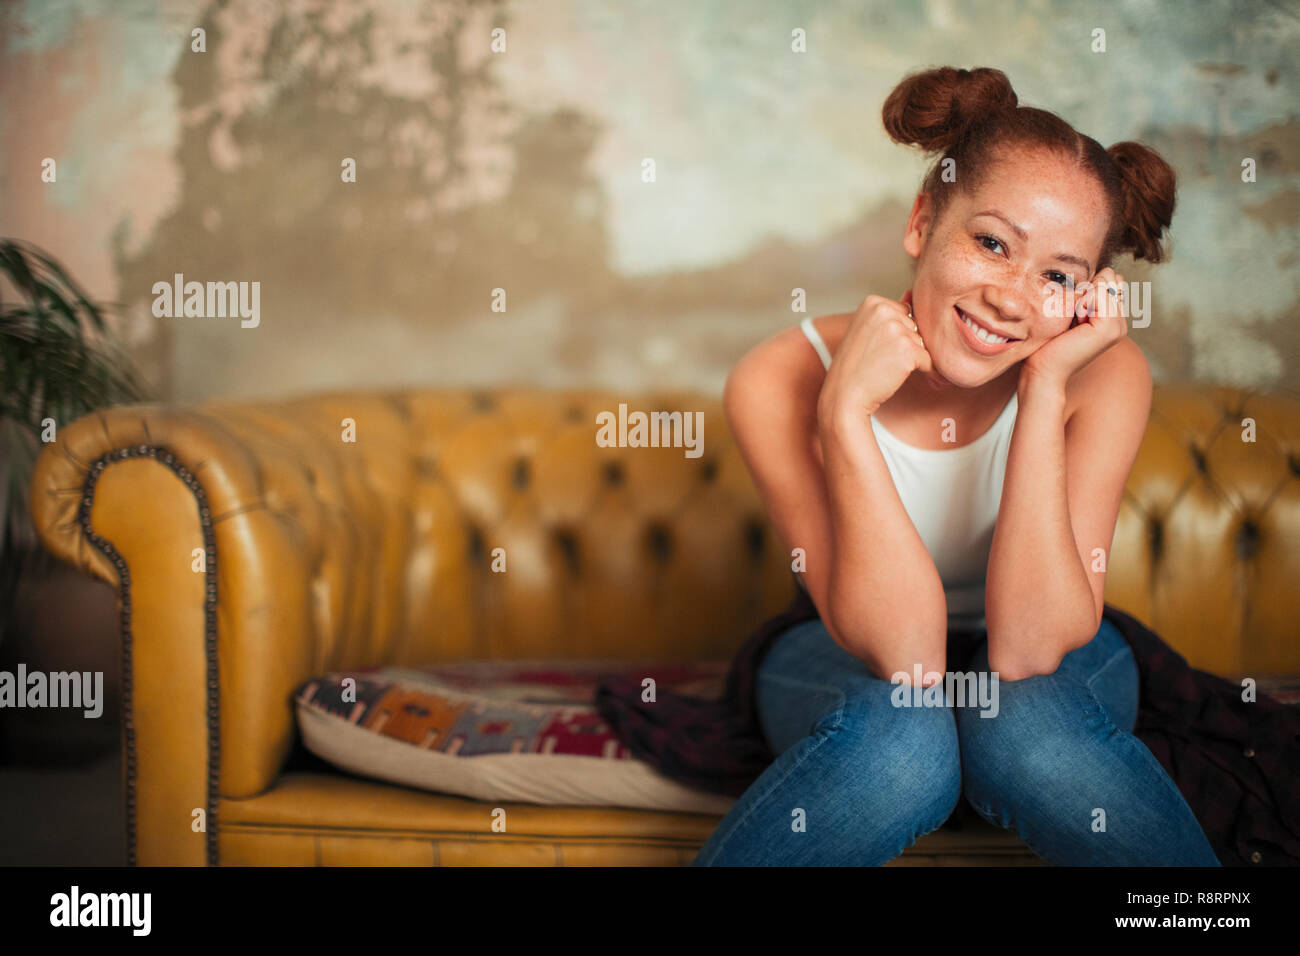 Portrait smiling, confident young woman sitting on sofa Stock Photo